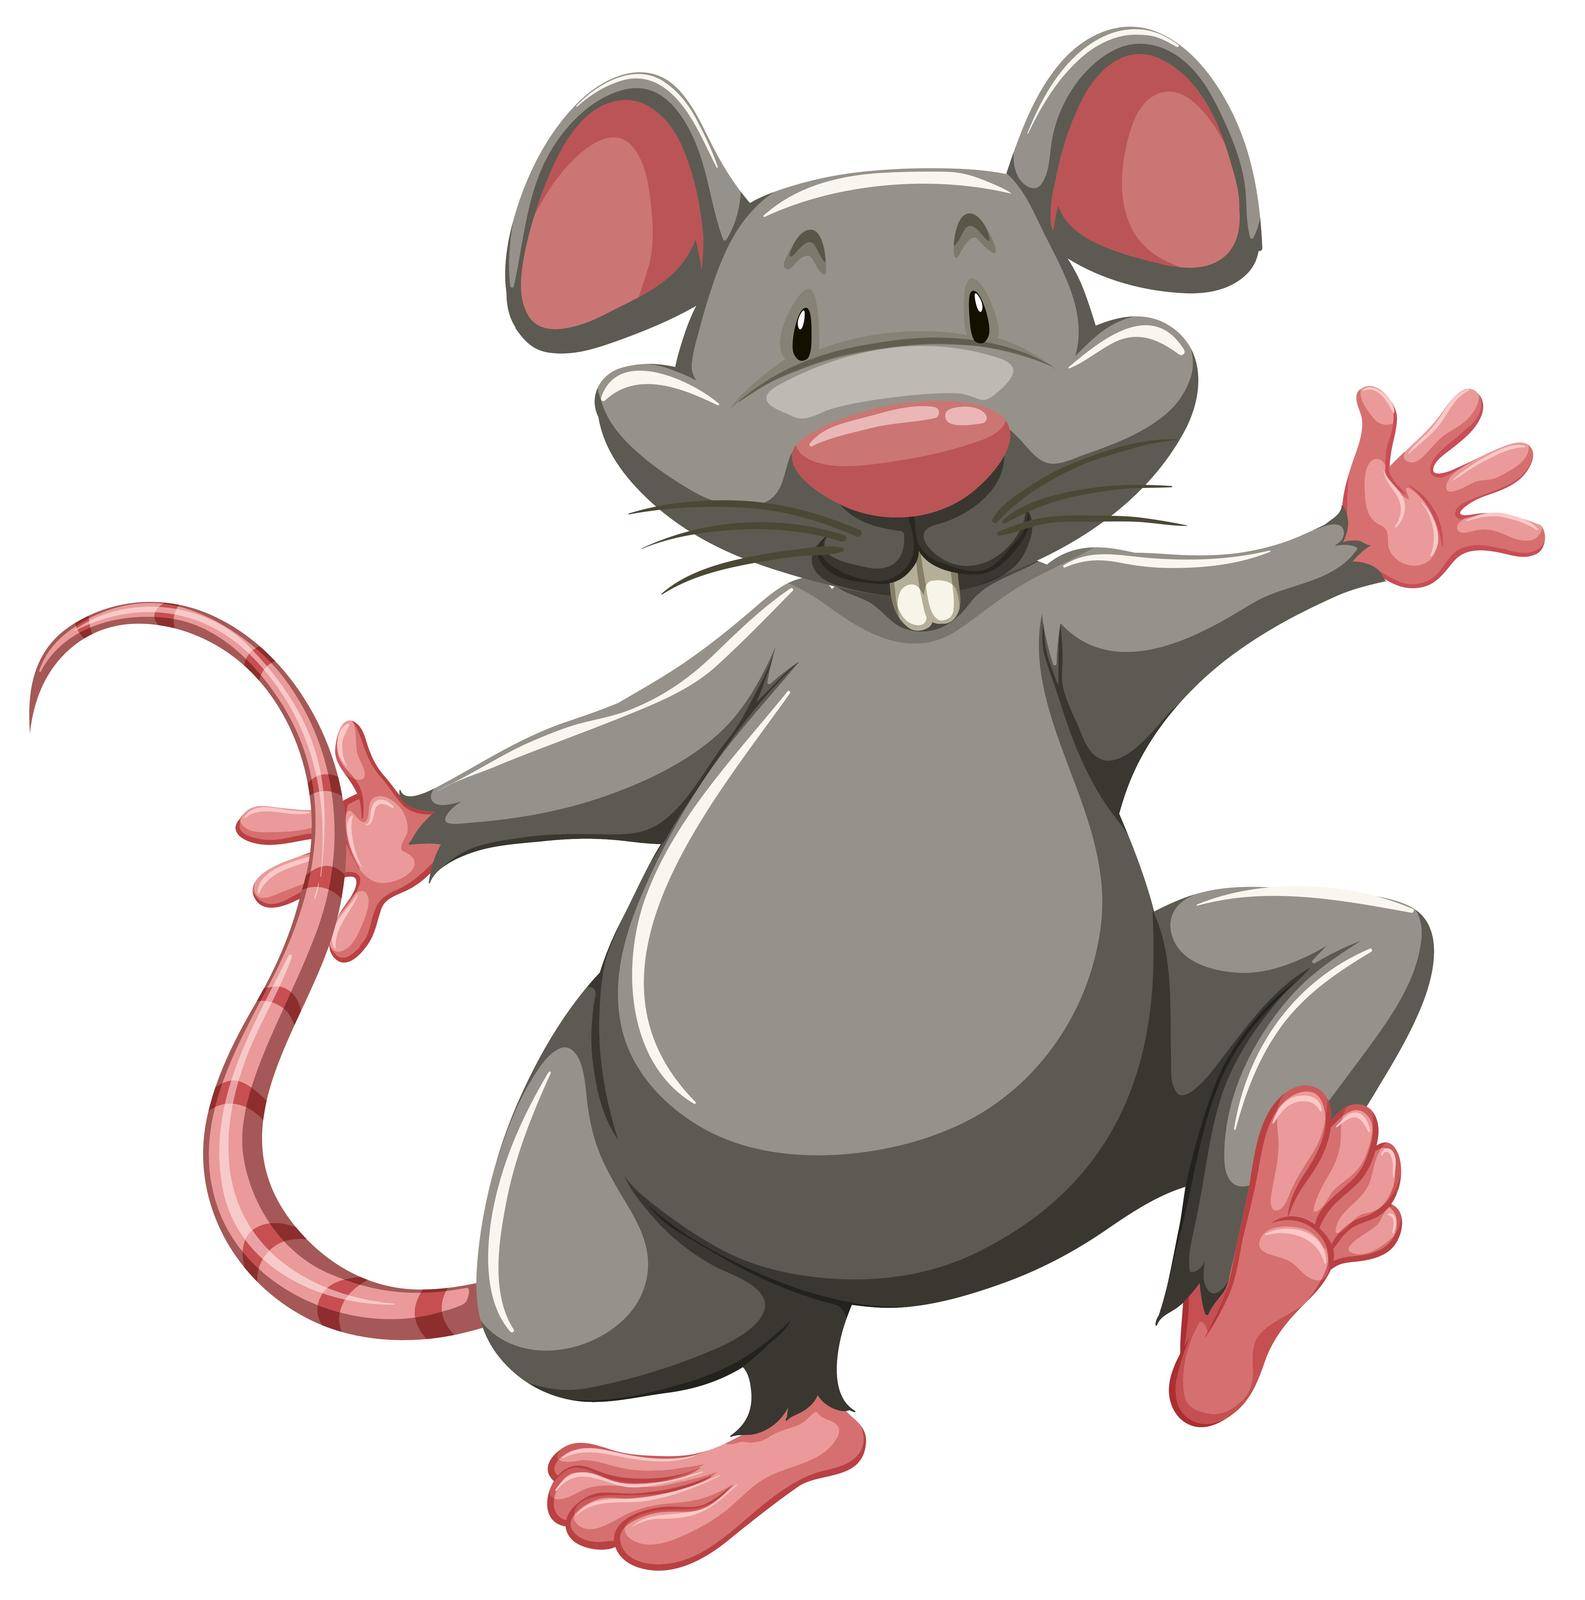 One gray rat on a white background